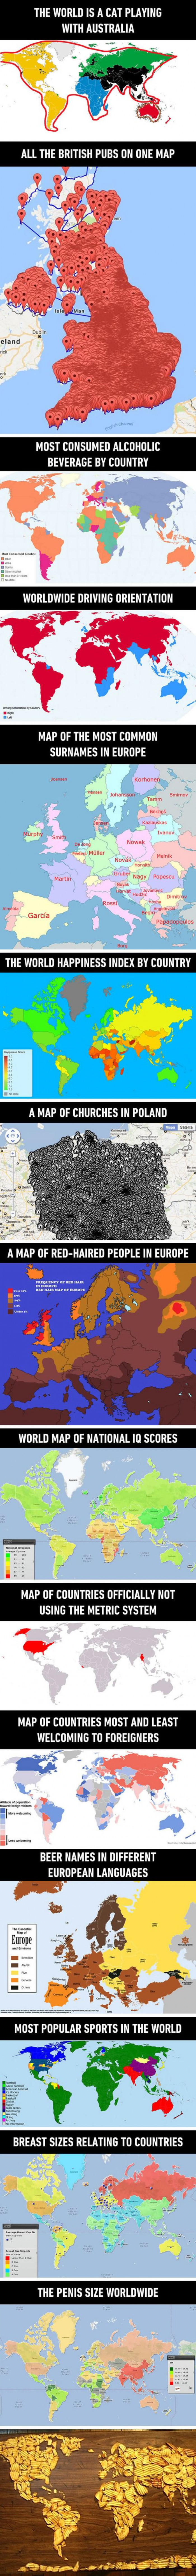 15 Amazing Maps You Need To See